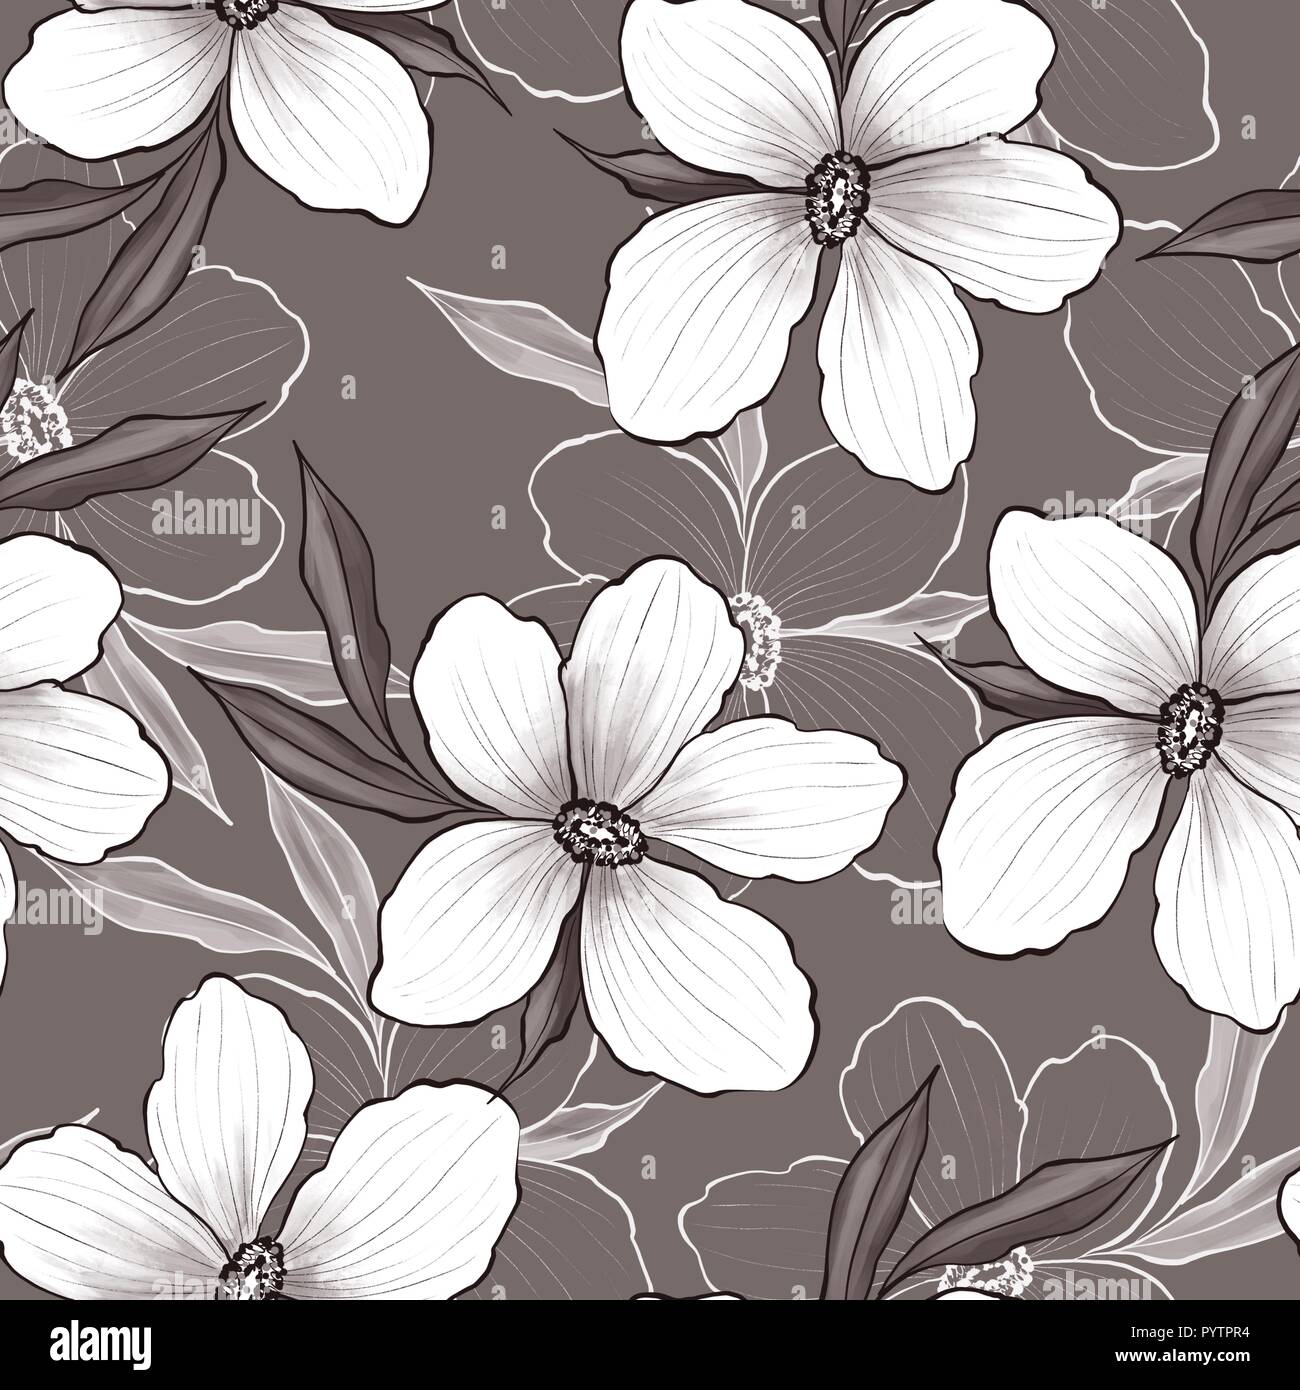 Black And White Seamless Simple Floral Pattern Stock Photo